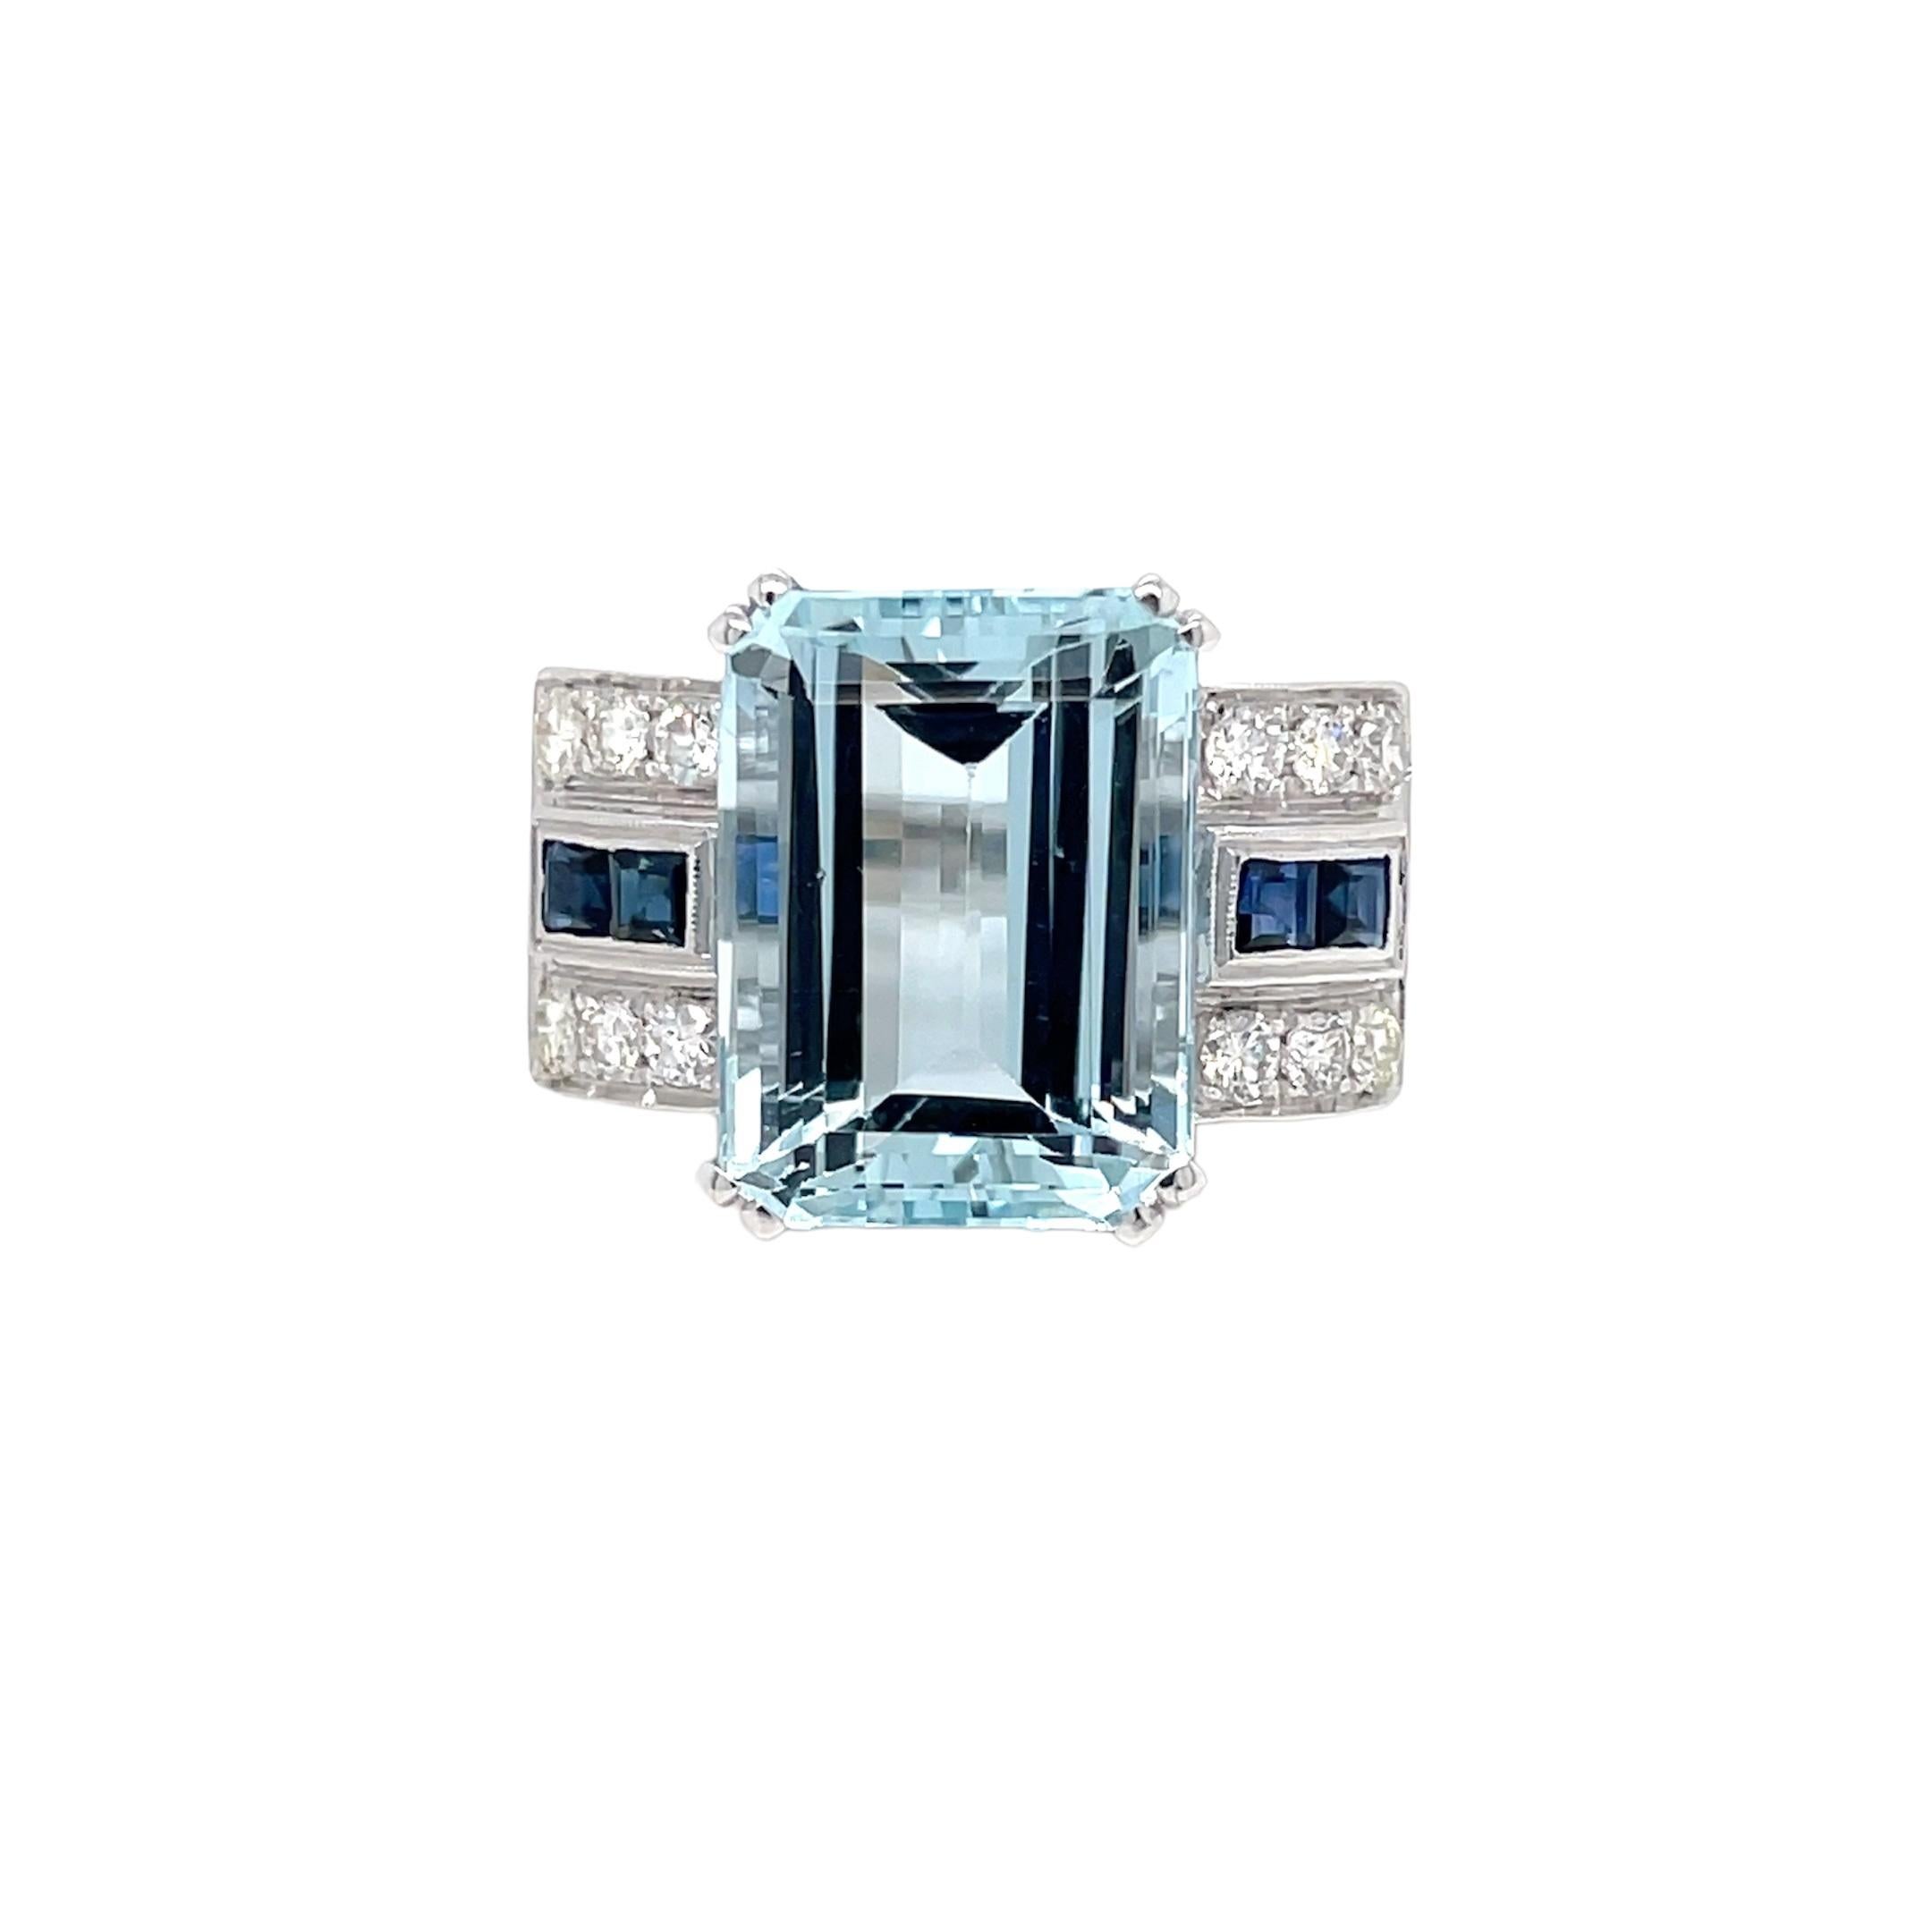 Art Deco style ring set in the center with a stunning Aquamarine weighing 11,54 carats graded AAA, and surrounded by approx. 0.50 carat of custom cut Sapphires and 0.65 ct of round brilliant cut diamonds graded G Color Vvs Clarity, Remarkable